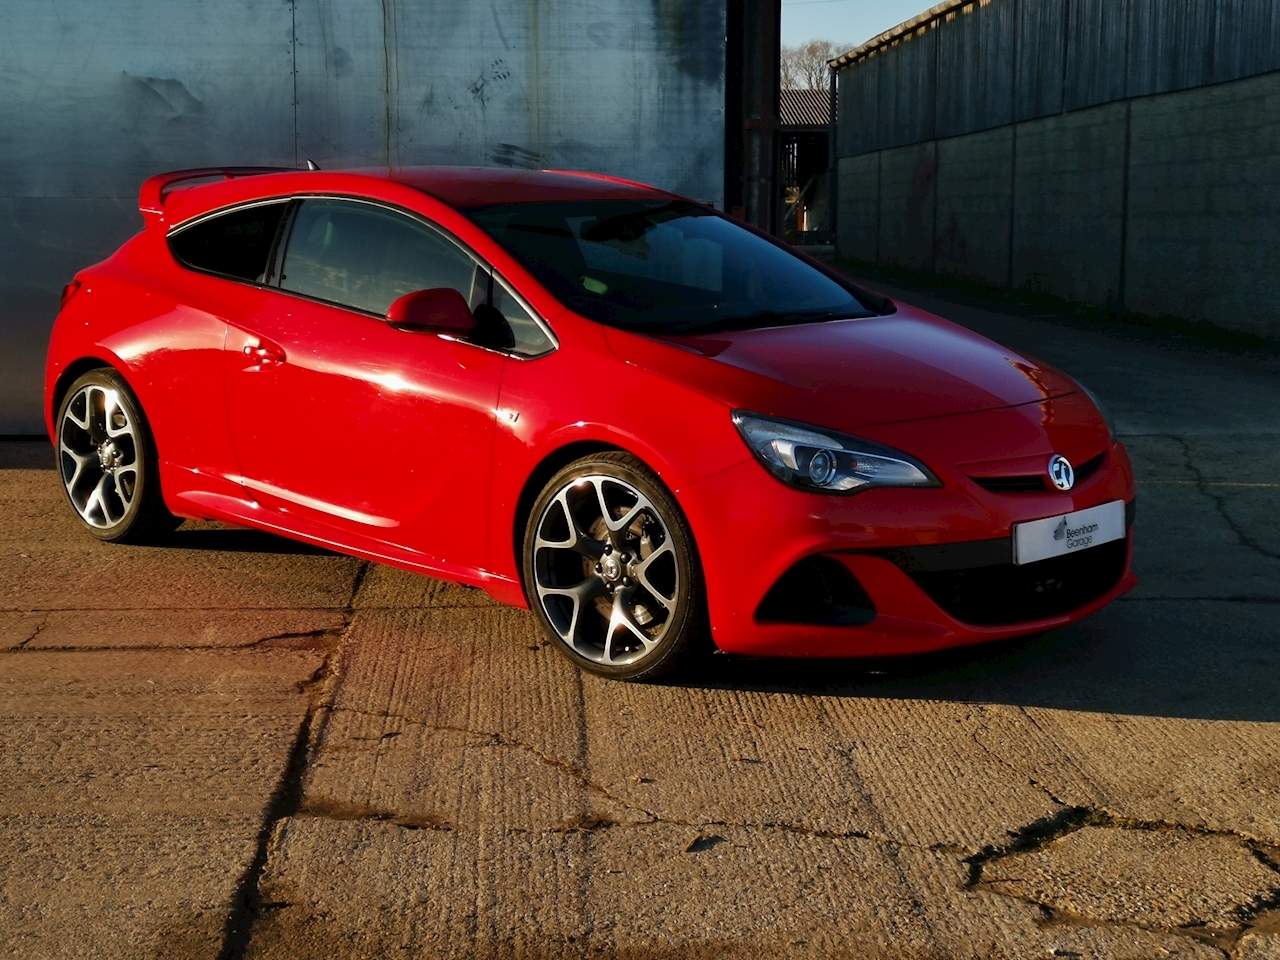 Indoor Car Cover for Vauxhall Astra VXR/GTC